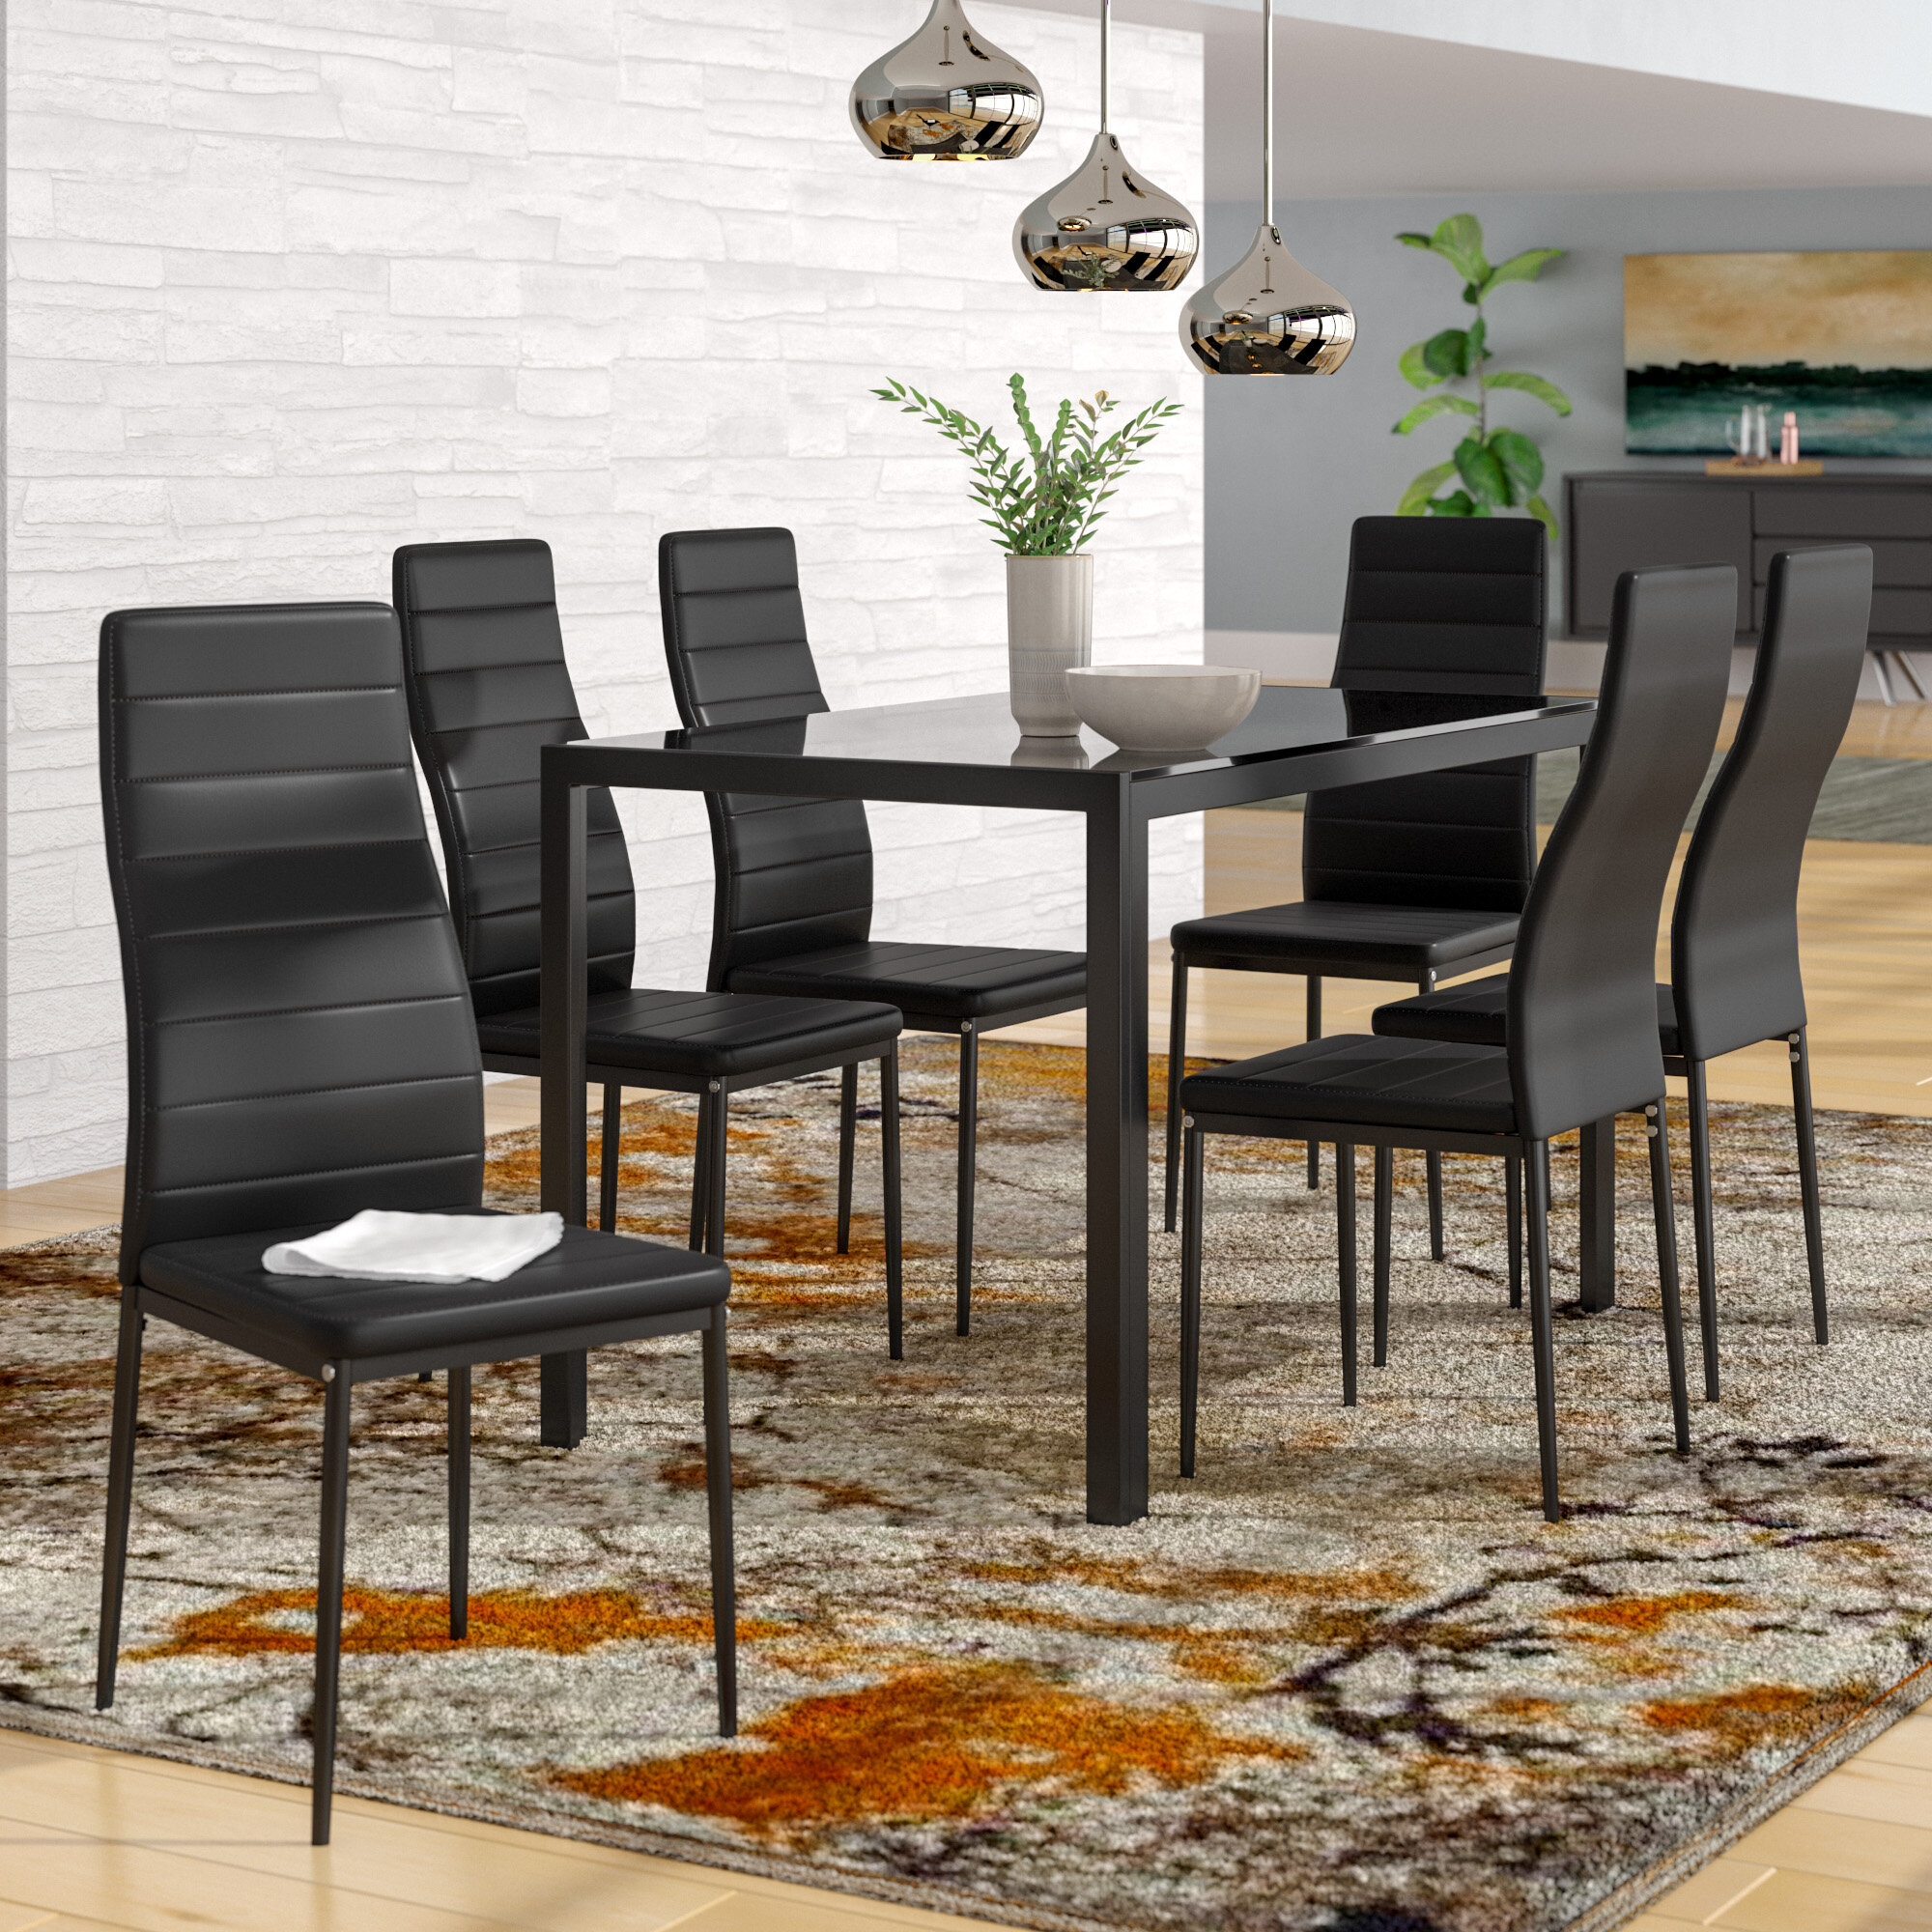 6 Modern Dining Chairs Dining Room Chair Table Faux Leather Furniture Cozy Black 